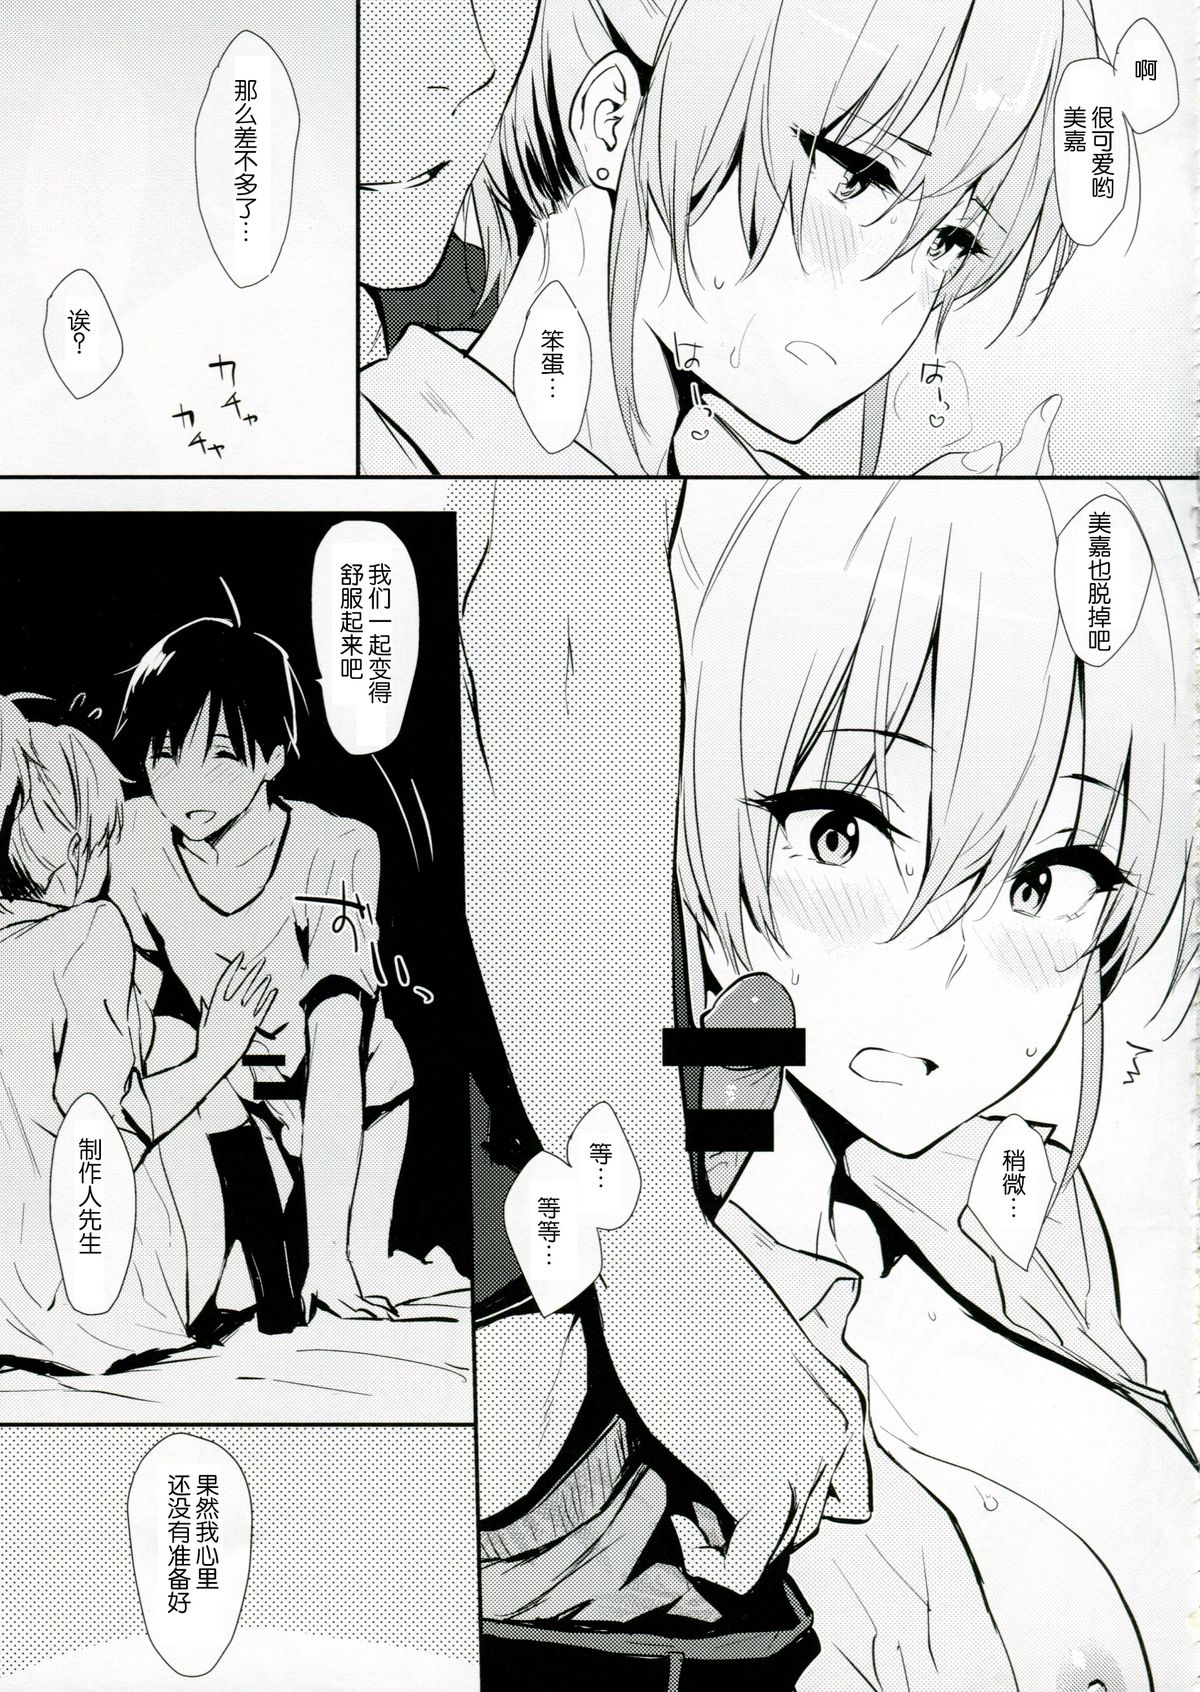 (COMIC1☆9) [Cat Food (NaPaTa)] Mika-ppoi no! (THE IDOLM@STER CINDERELLA GIRLS) [Chinese] [瓜皮汉化] page 8 full